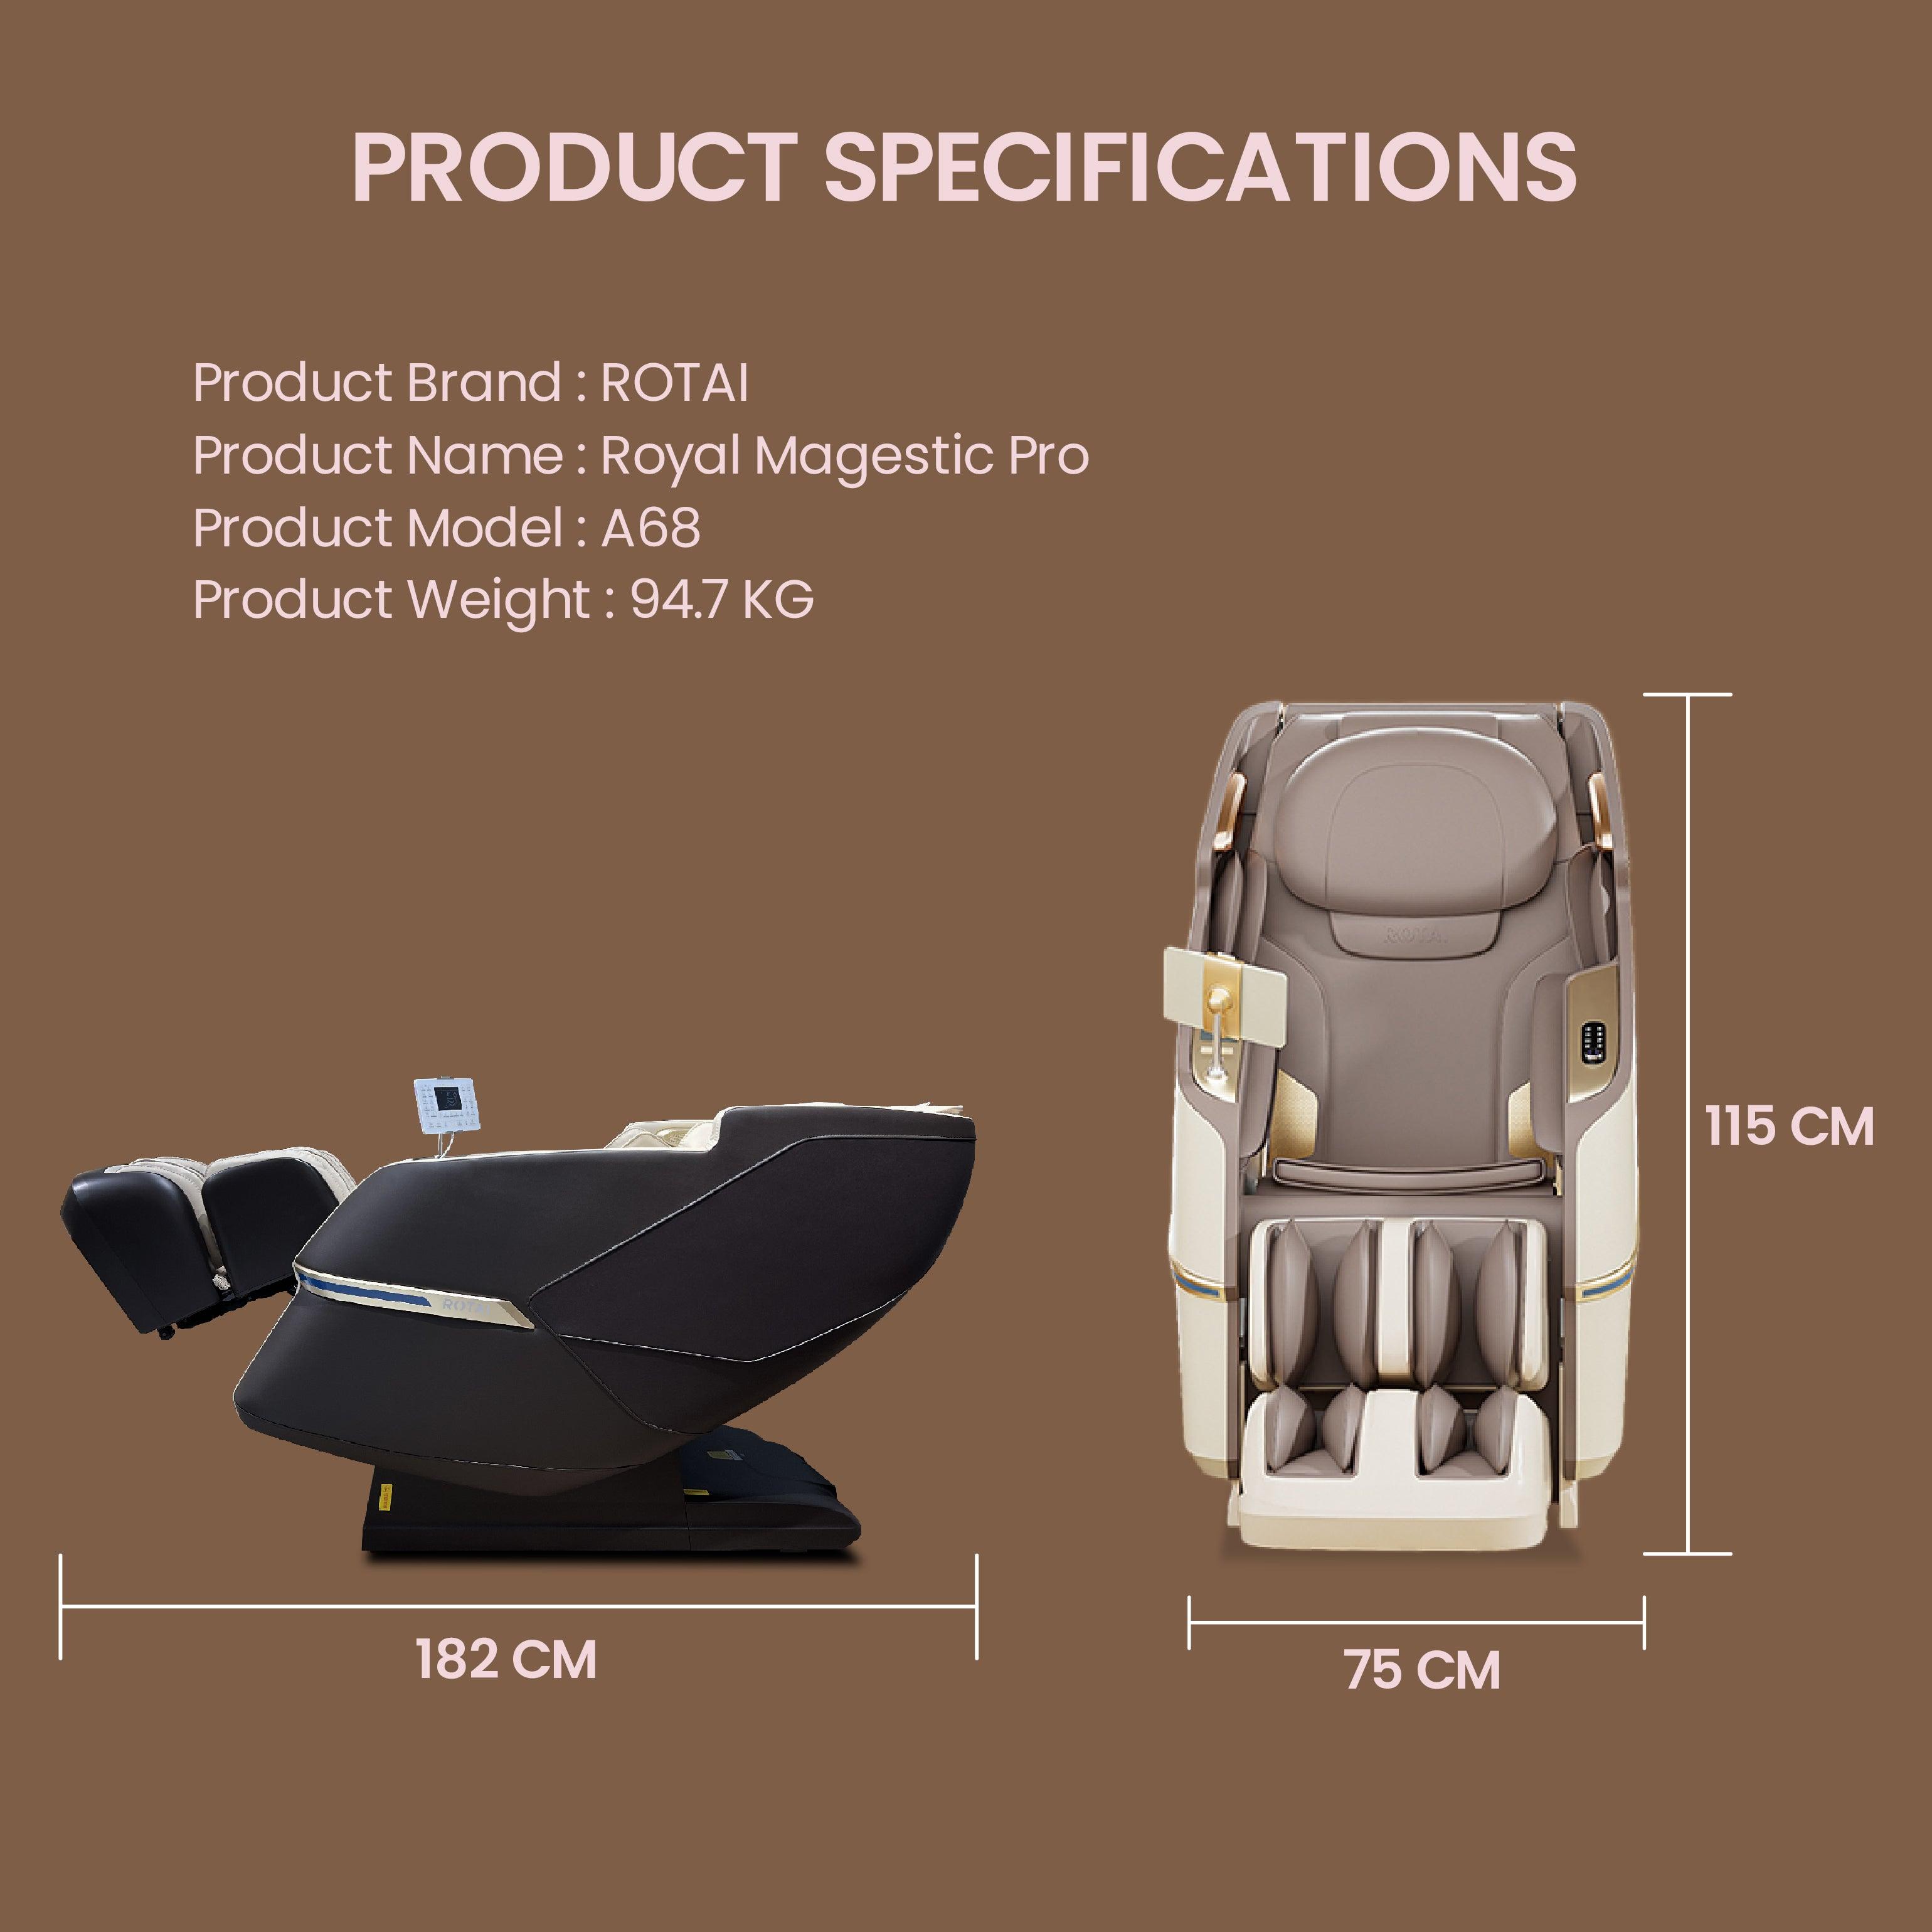 Royal Magestic Pro Massage Chair (Brown), dimensions: 182cm x 75cm x 115cm, model A68, weight: 94.7kg, best massage chair in UAE.